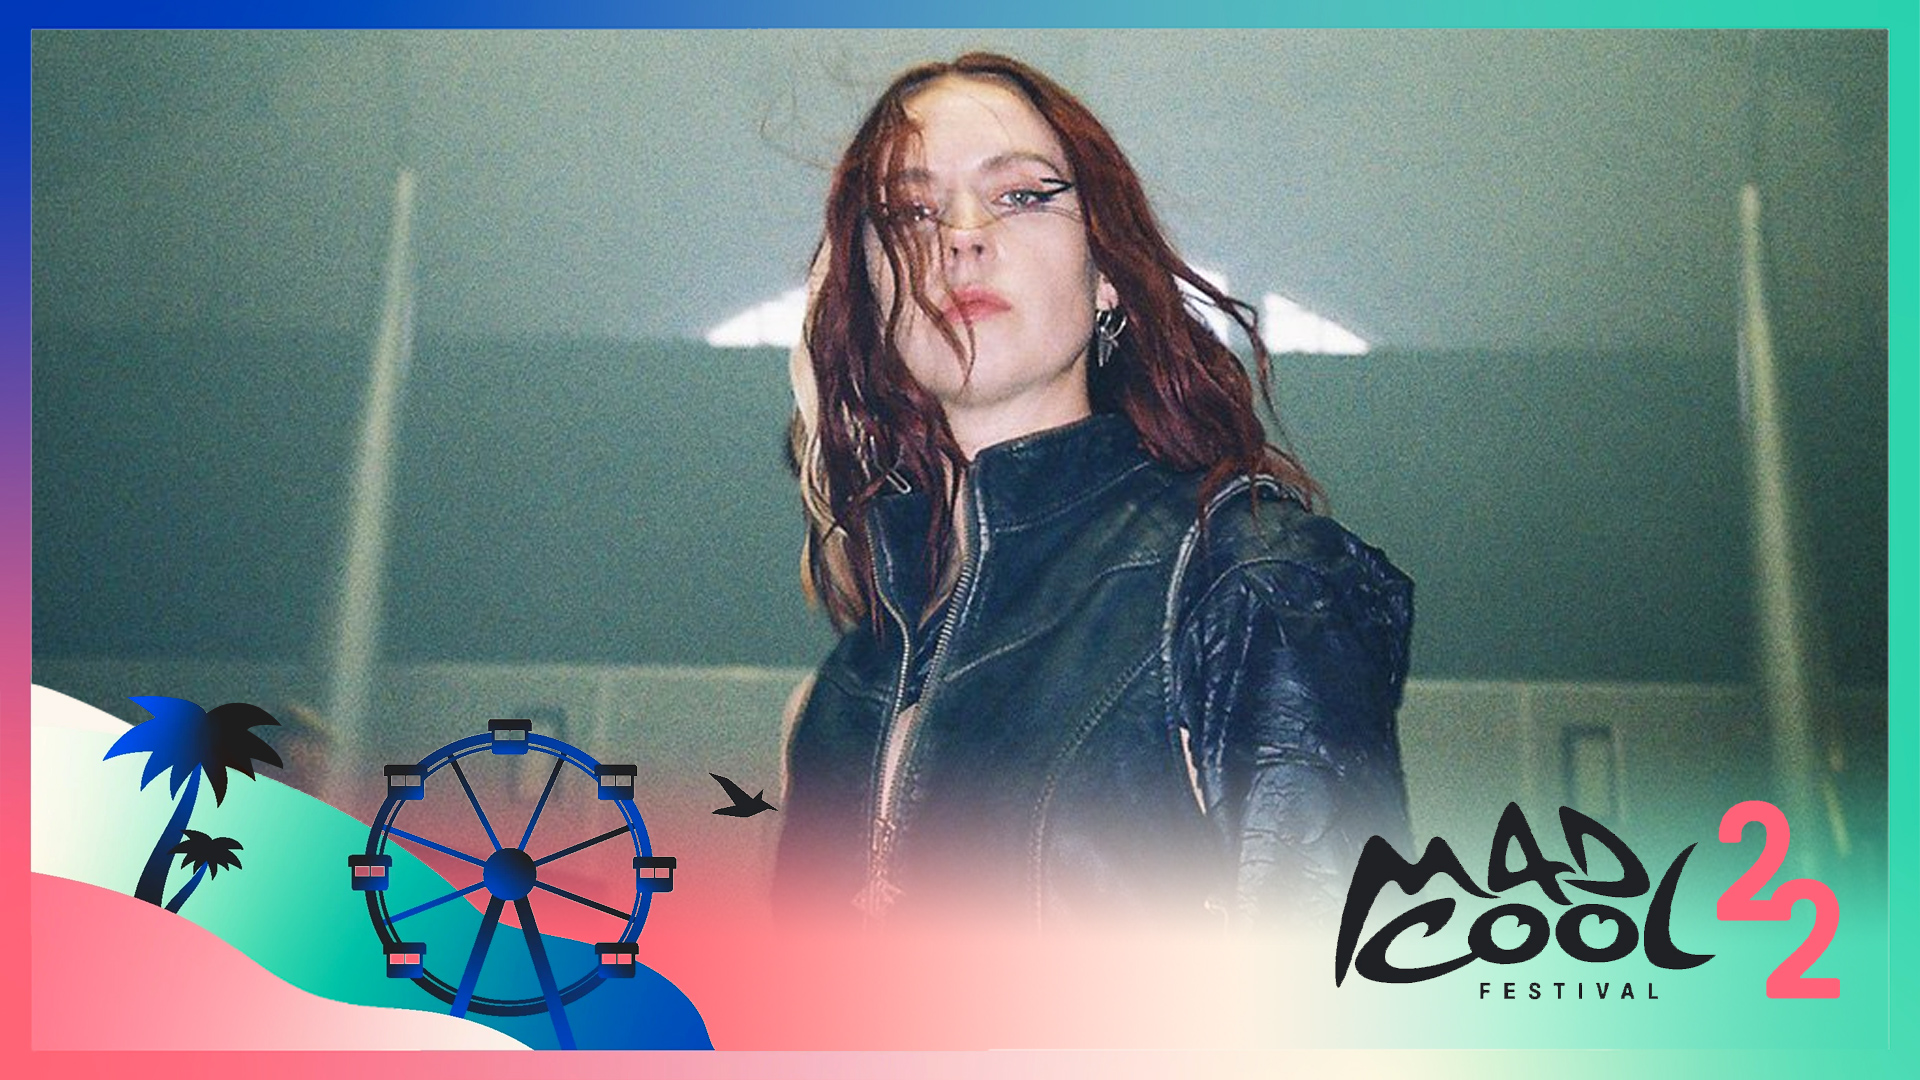 MØ at Mad Cool Festival 2022: Summer Festival Season, New Music, and More